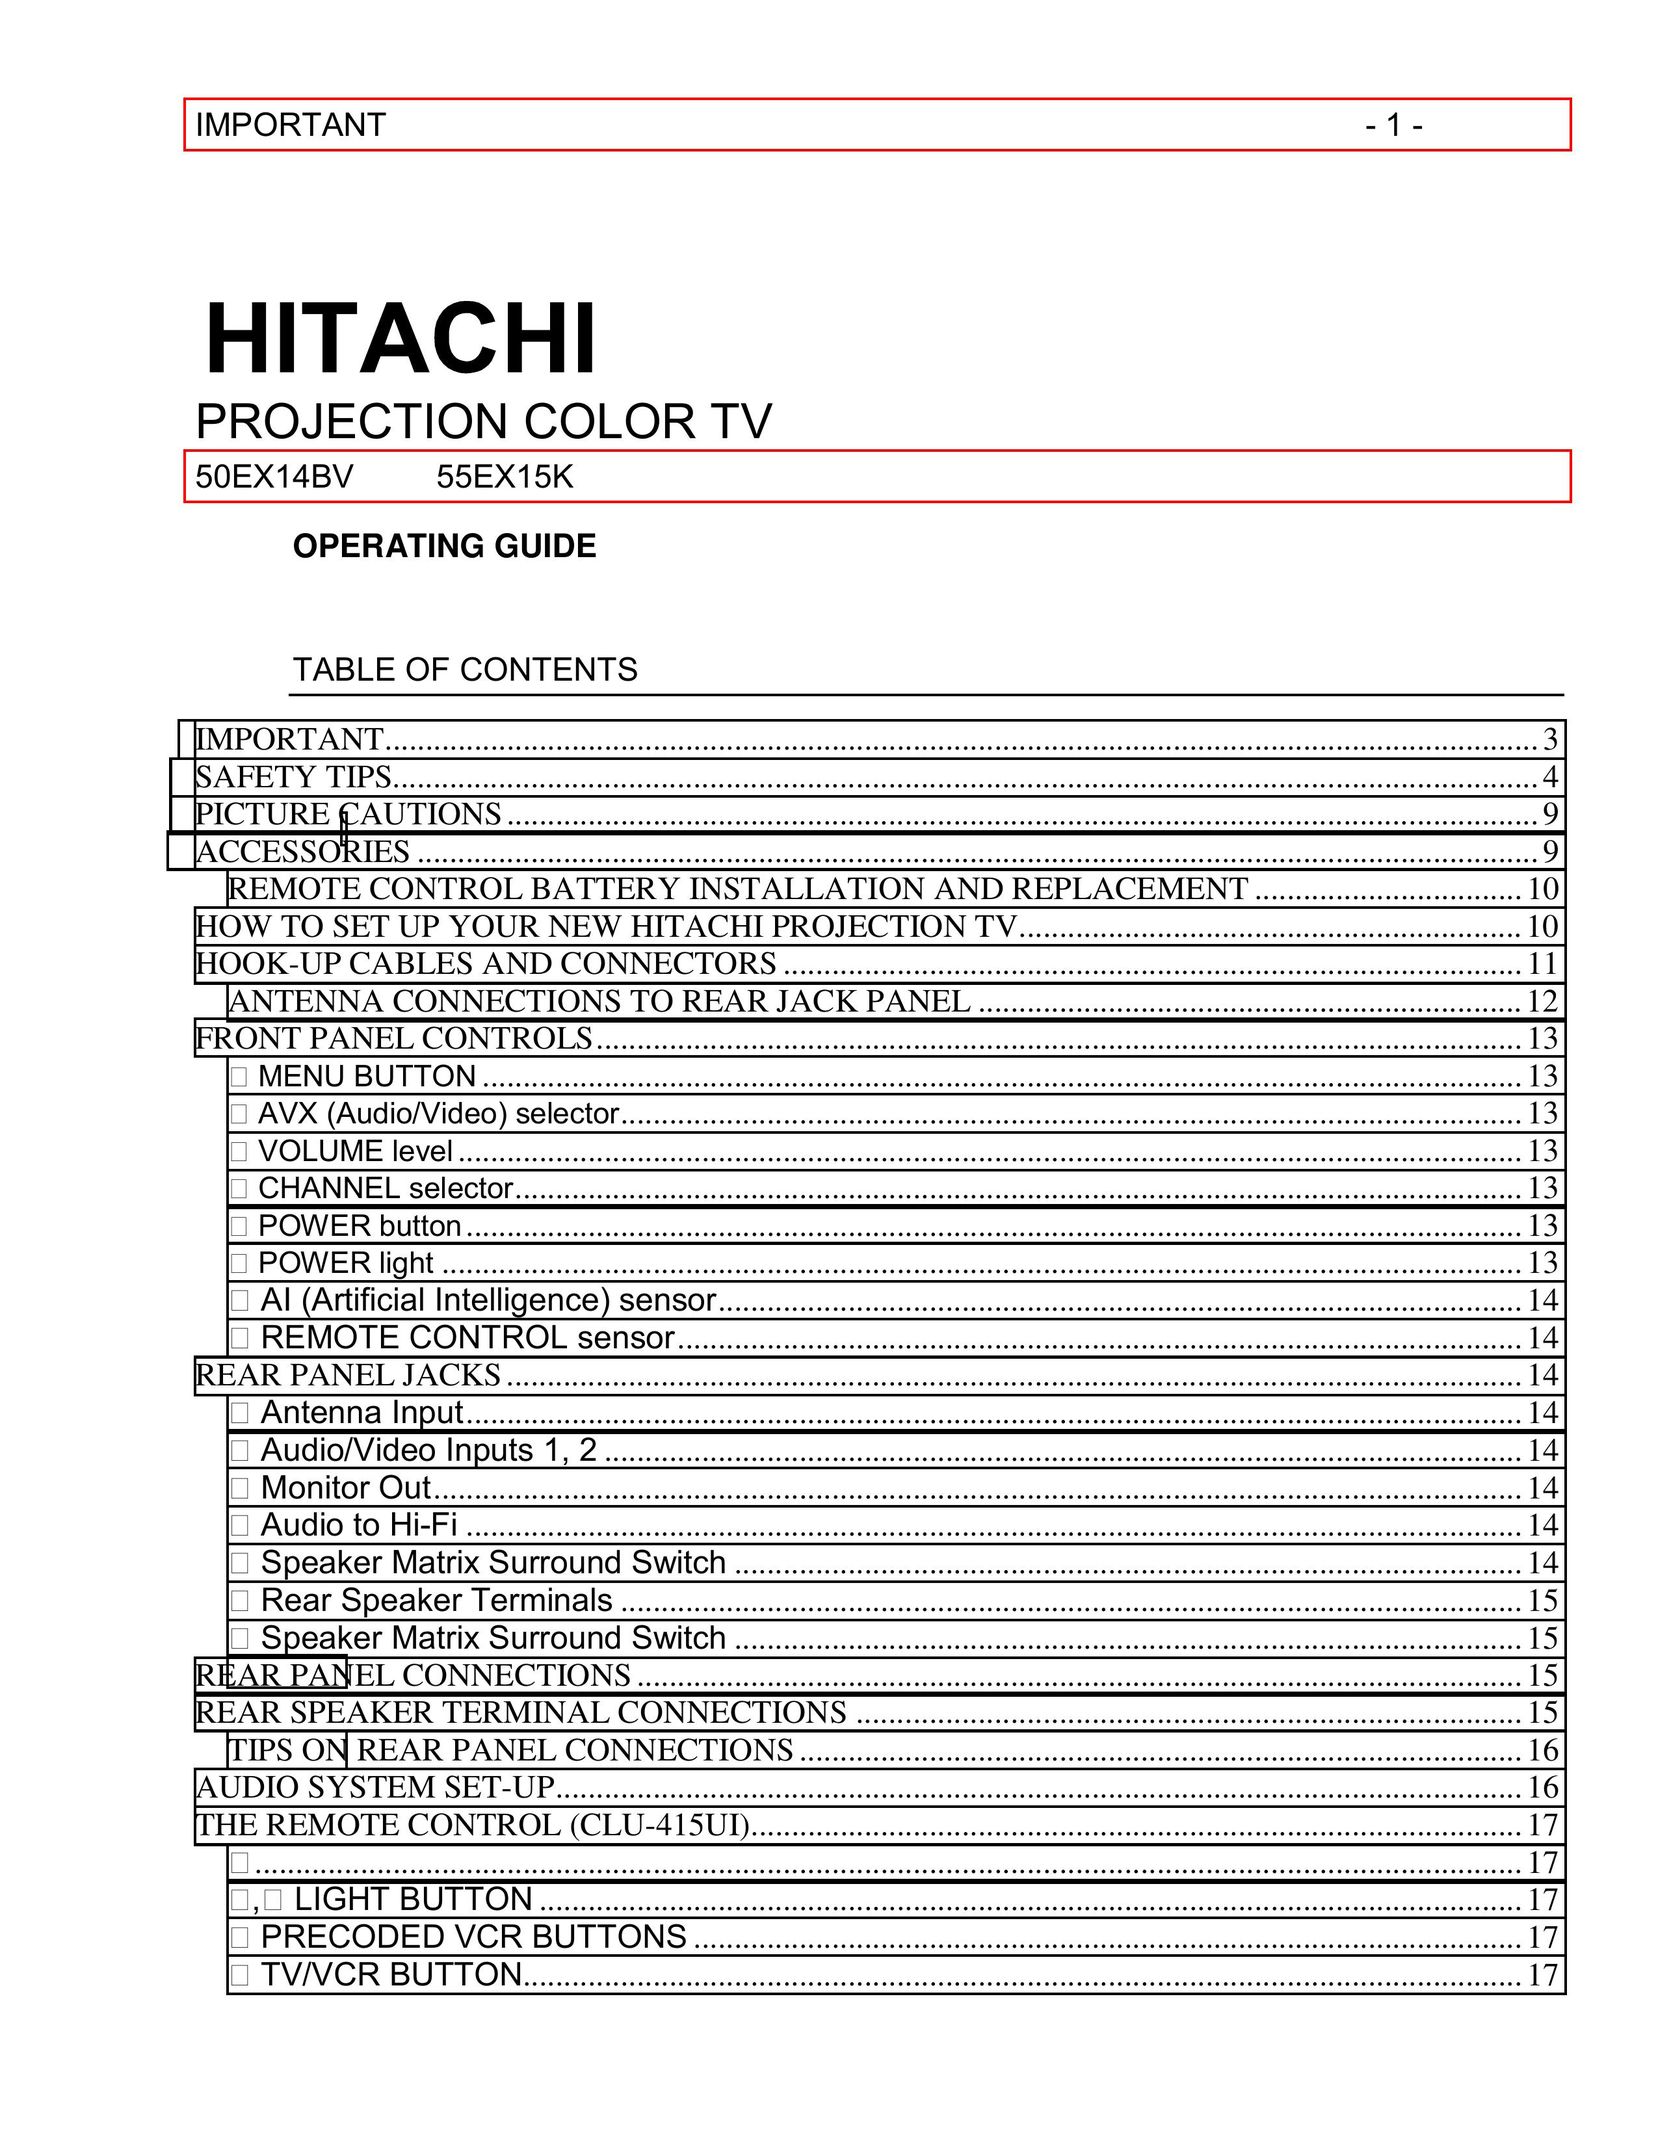 Hitachi 50EX14BV Projection Television User Manual